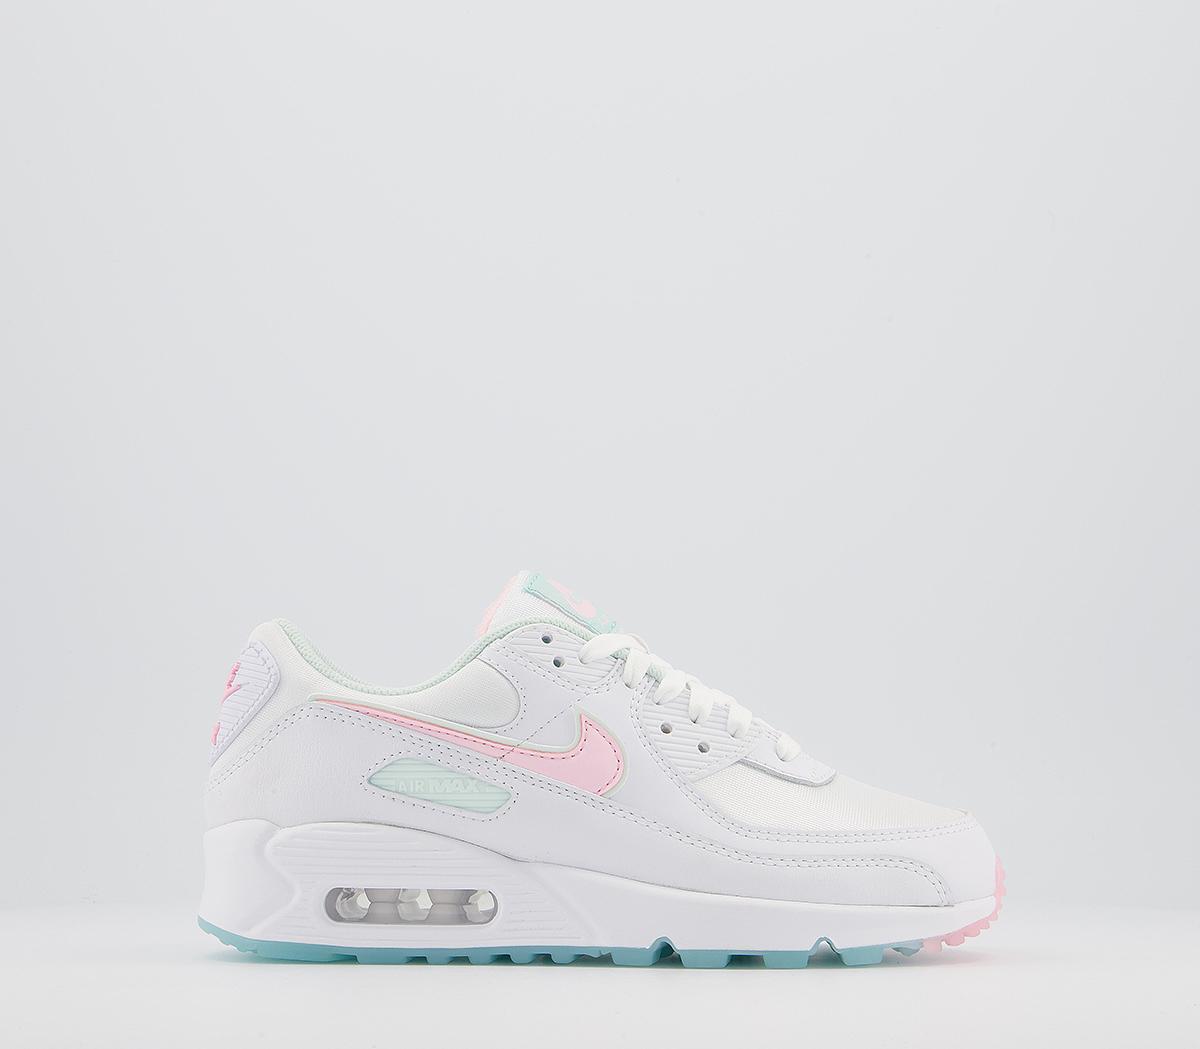 Lectura cuidadosa recuerda Macadán Nike Air Max 90 Trainers White Arctic Punch Barely Green - Women's Trainers